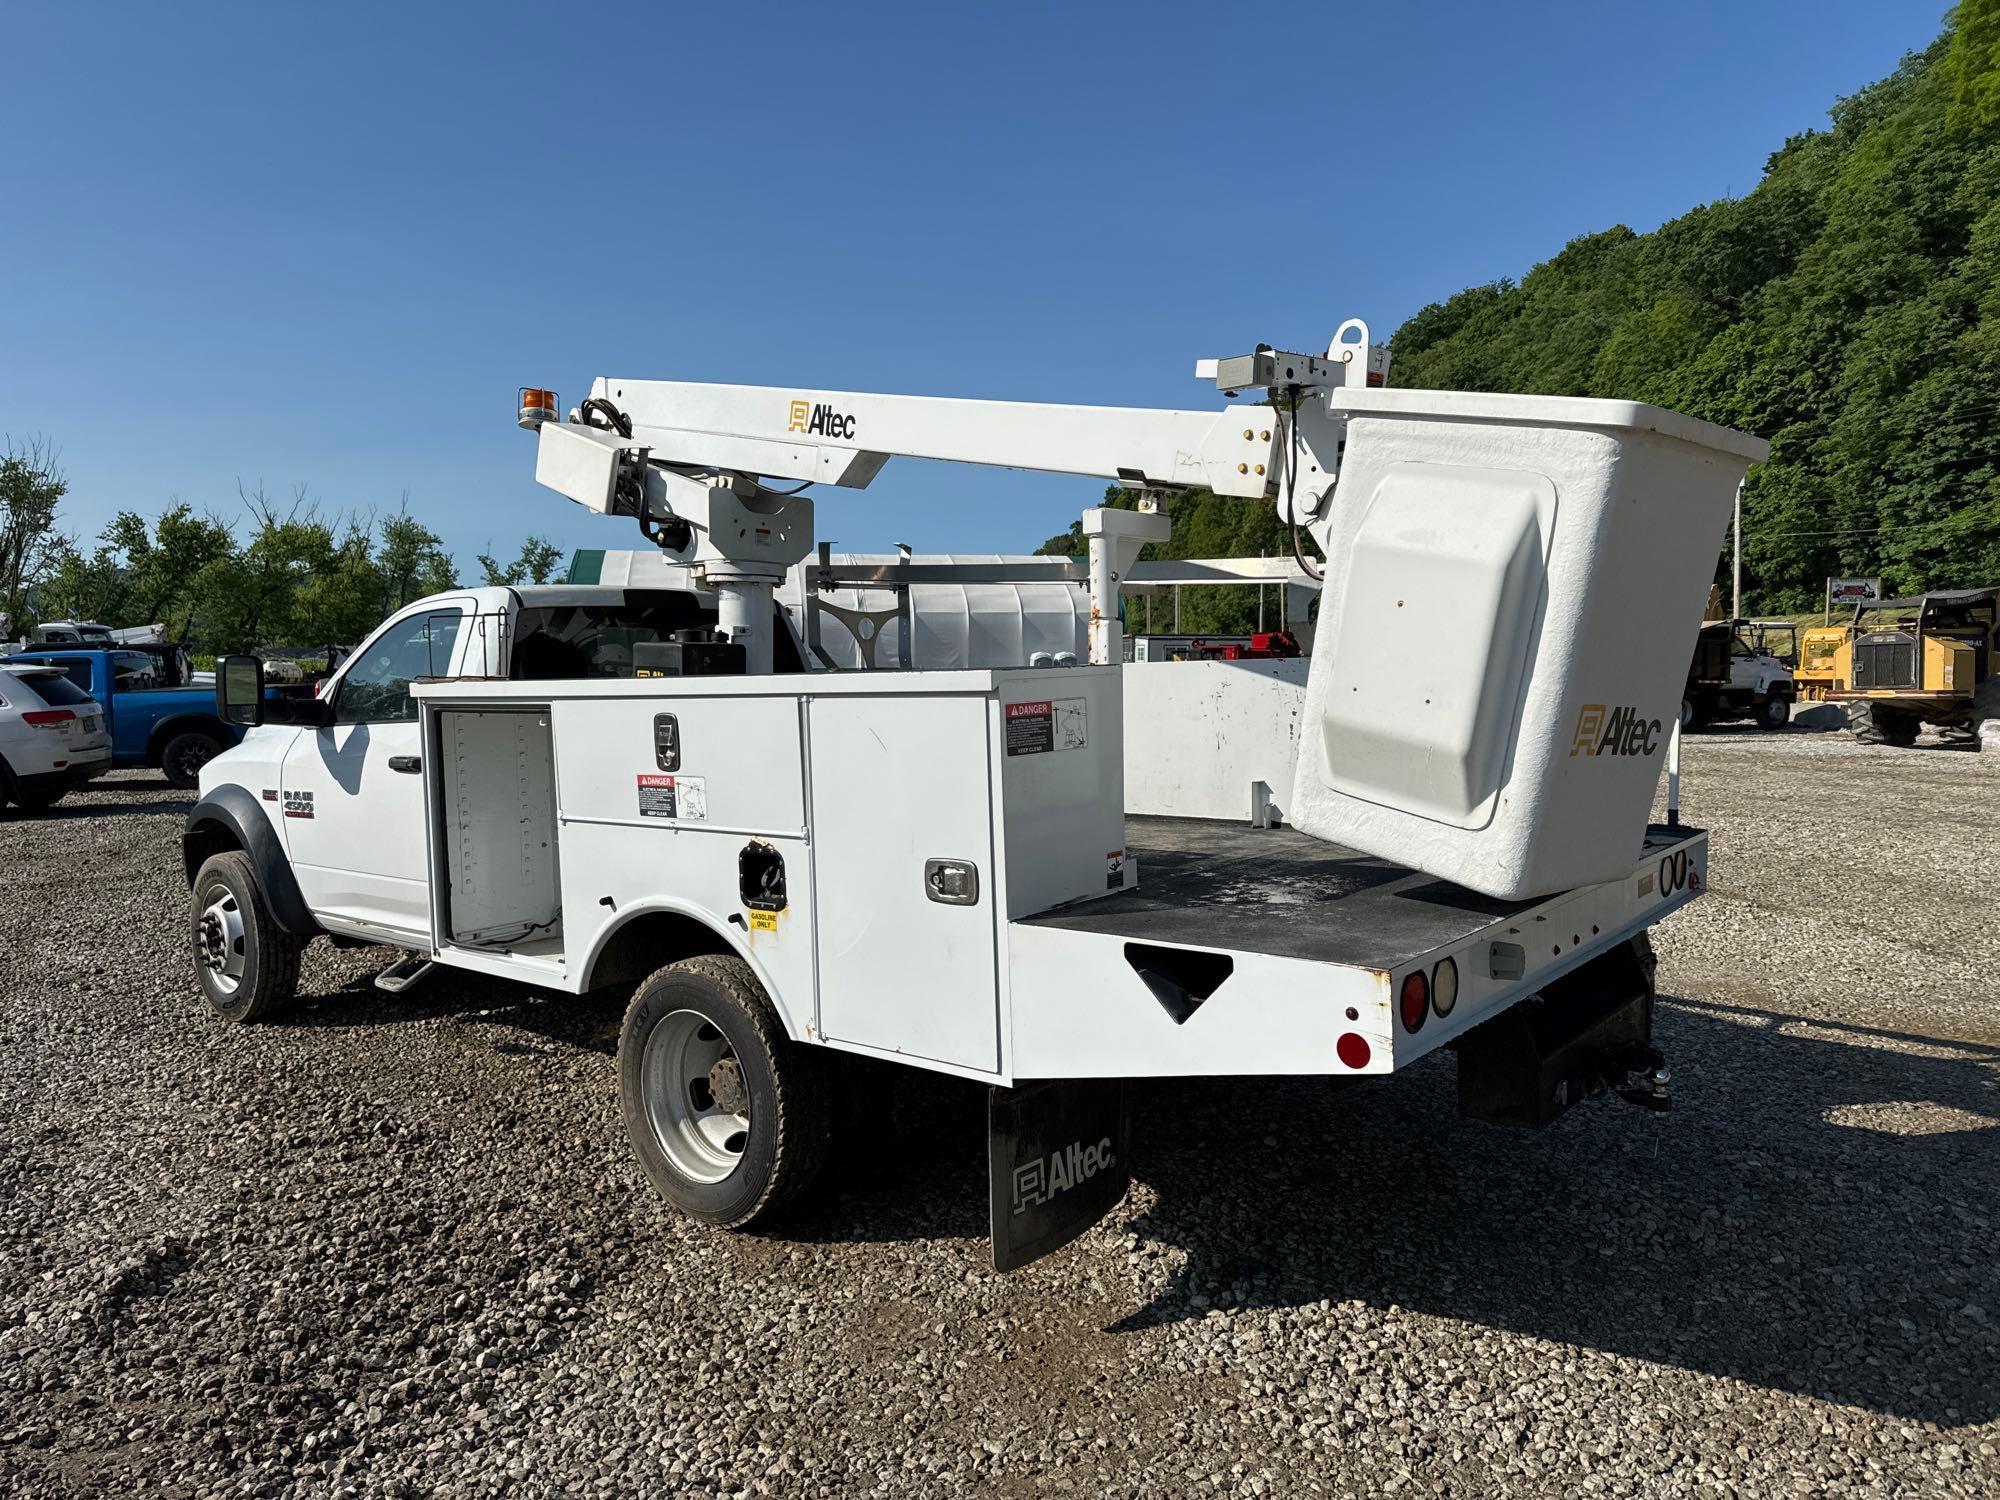 2016 DODGE 4500 BUCKET TRUCK VN:112003 powered by 6.4L Hemi gas engine, equipped with Allison